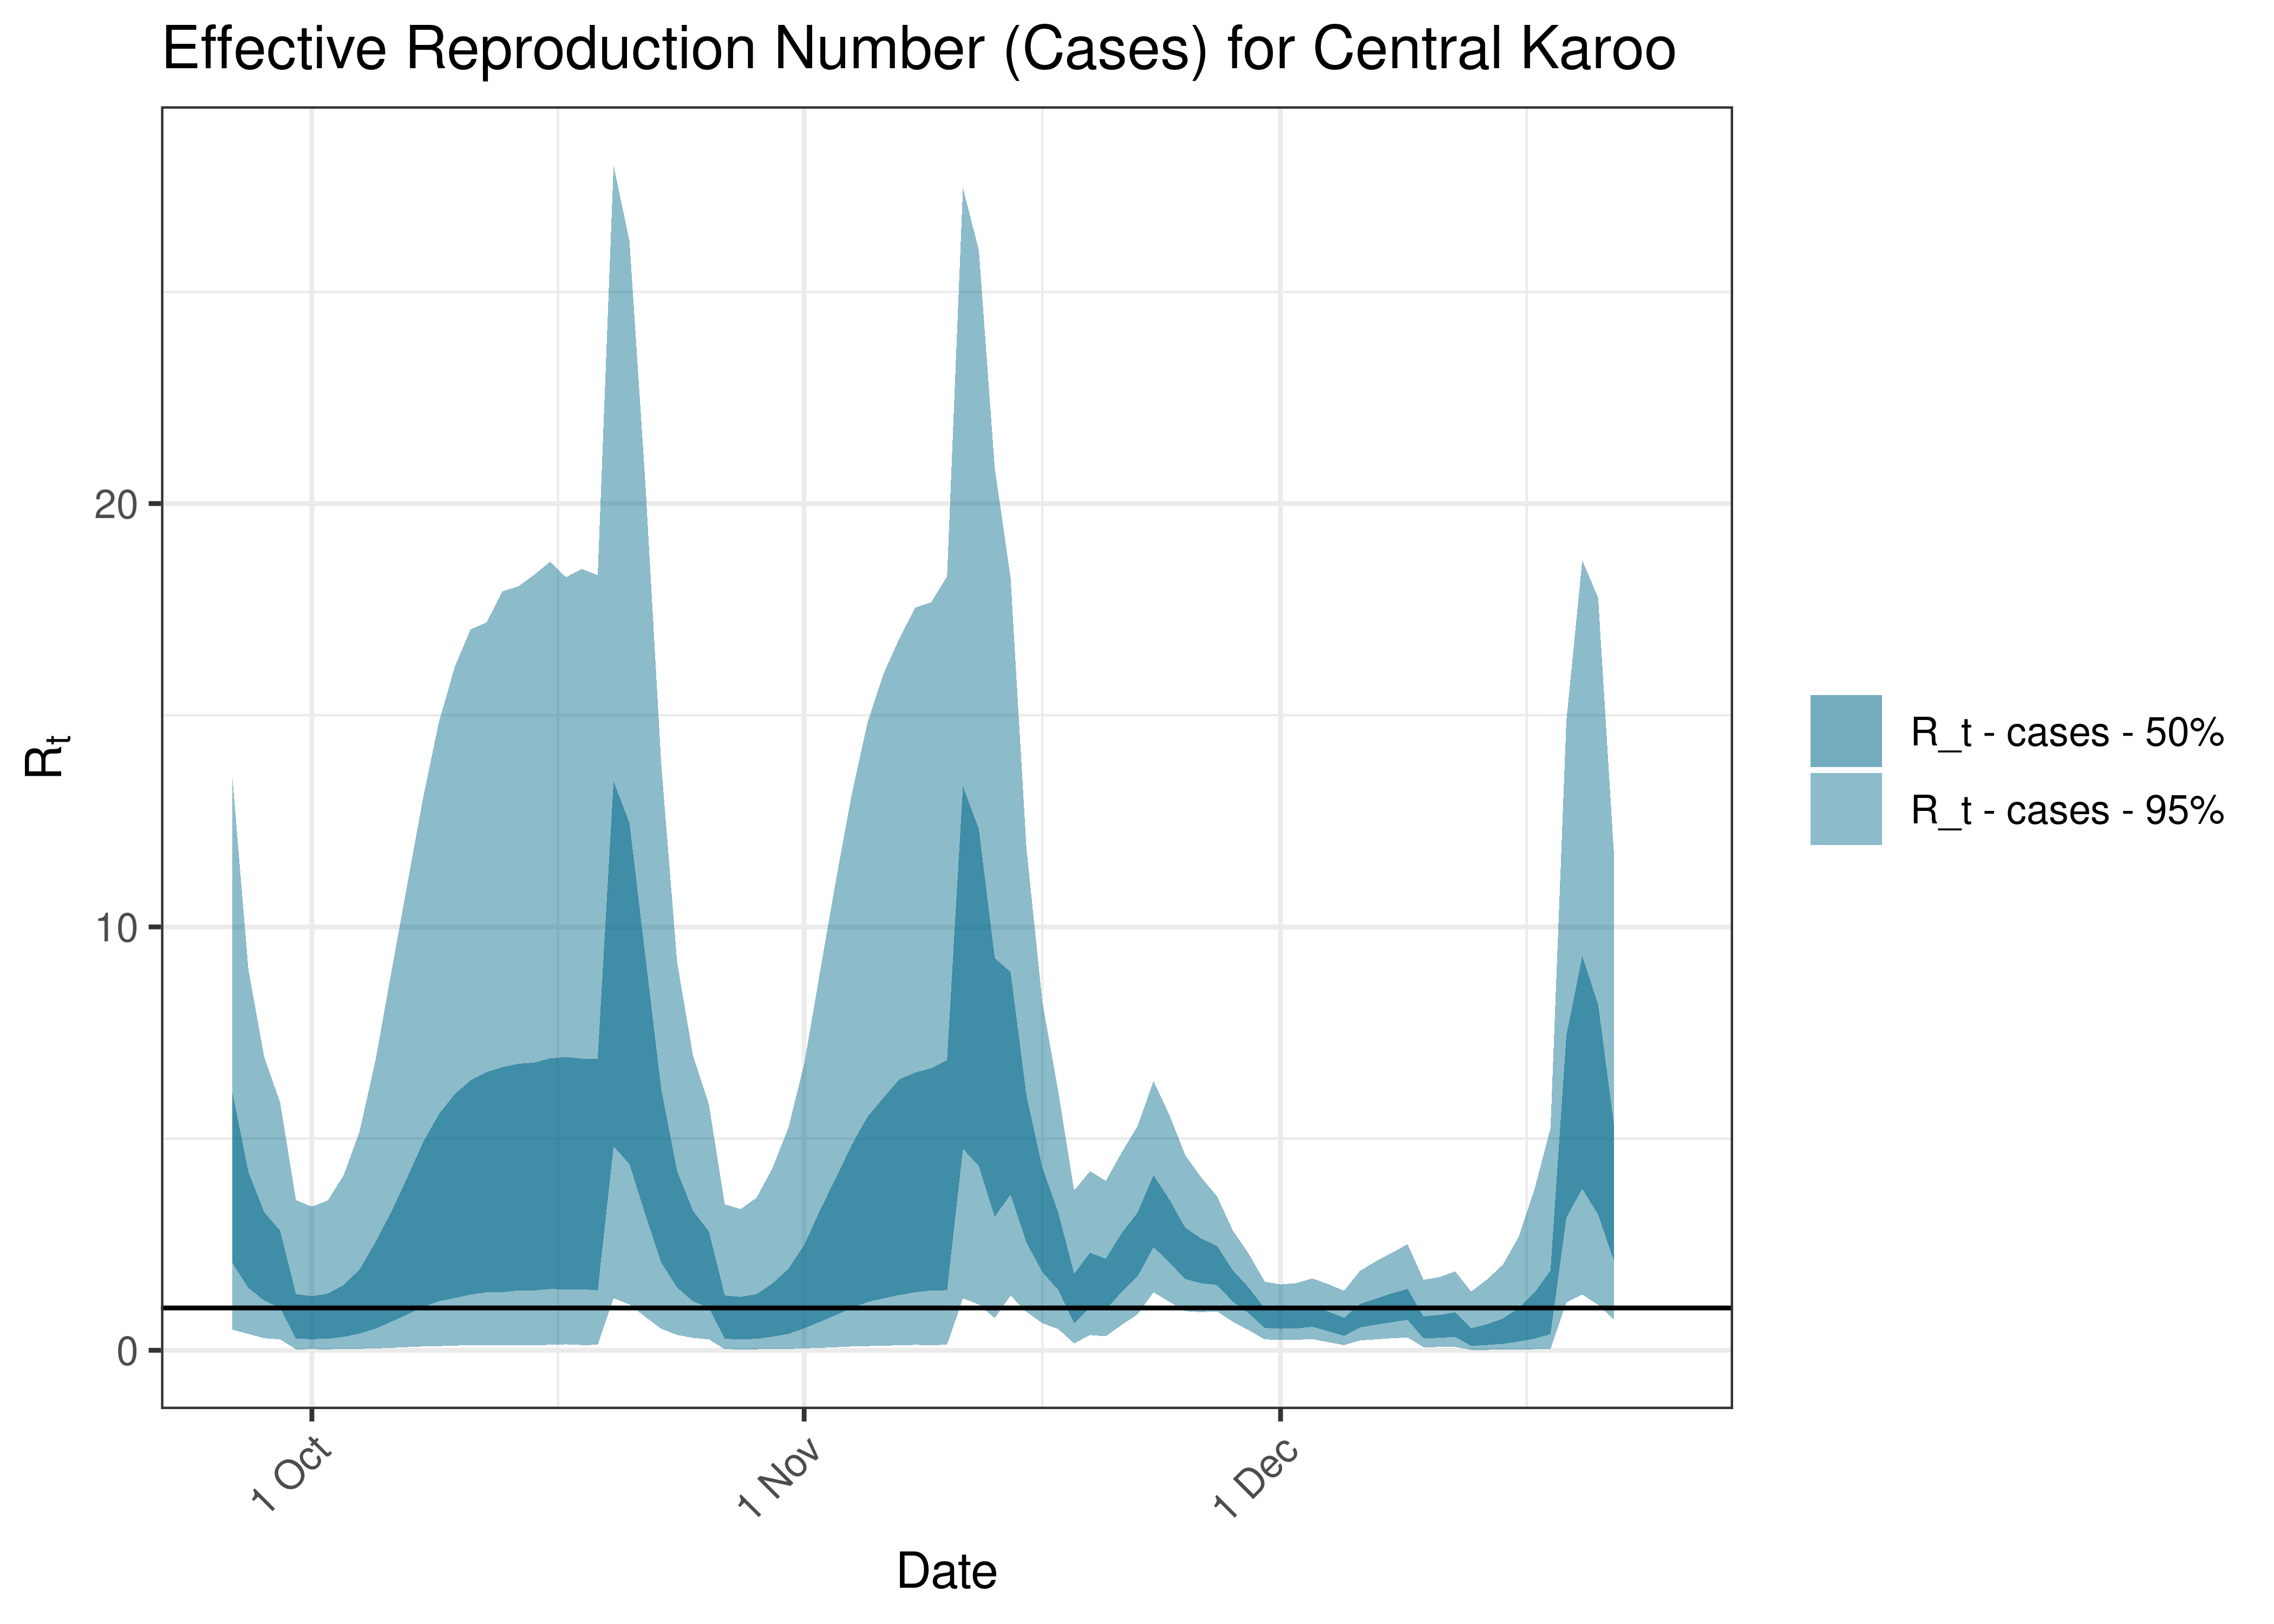 Estimated Effective Reproduction Number Based on Cases for Central Karoo over last 90 days